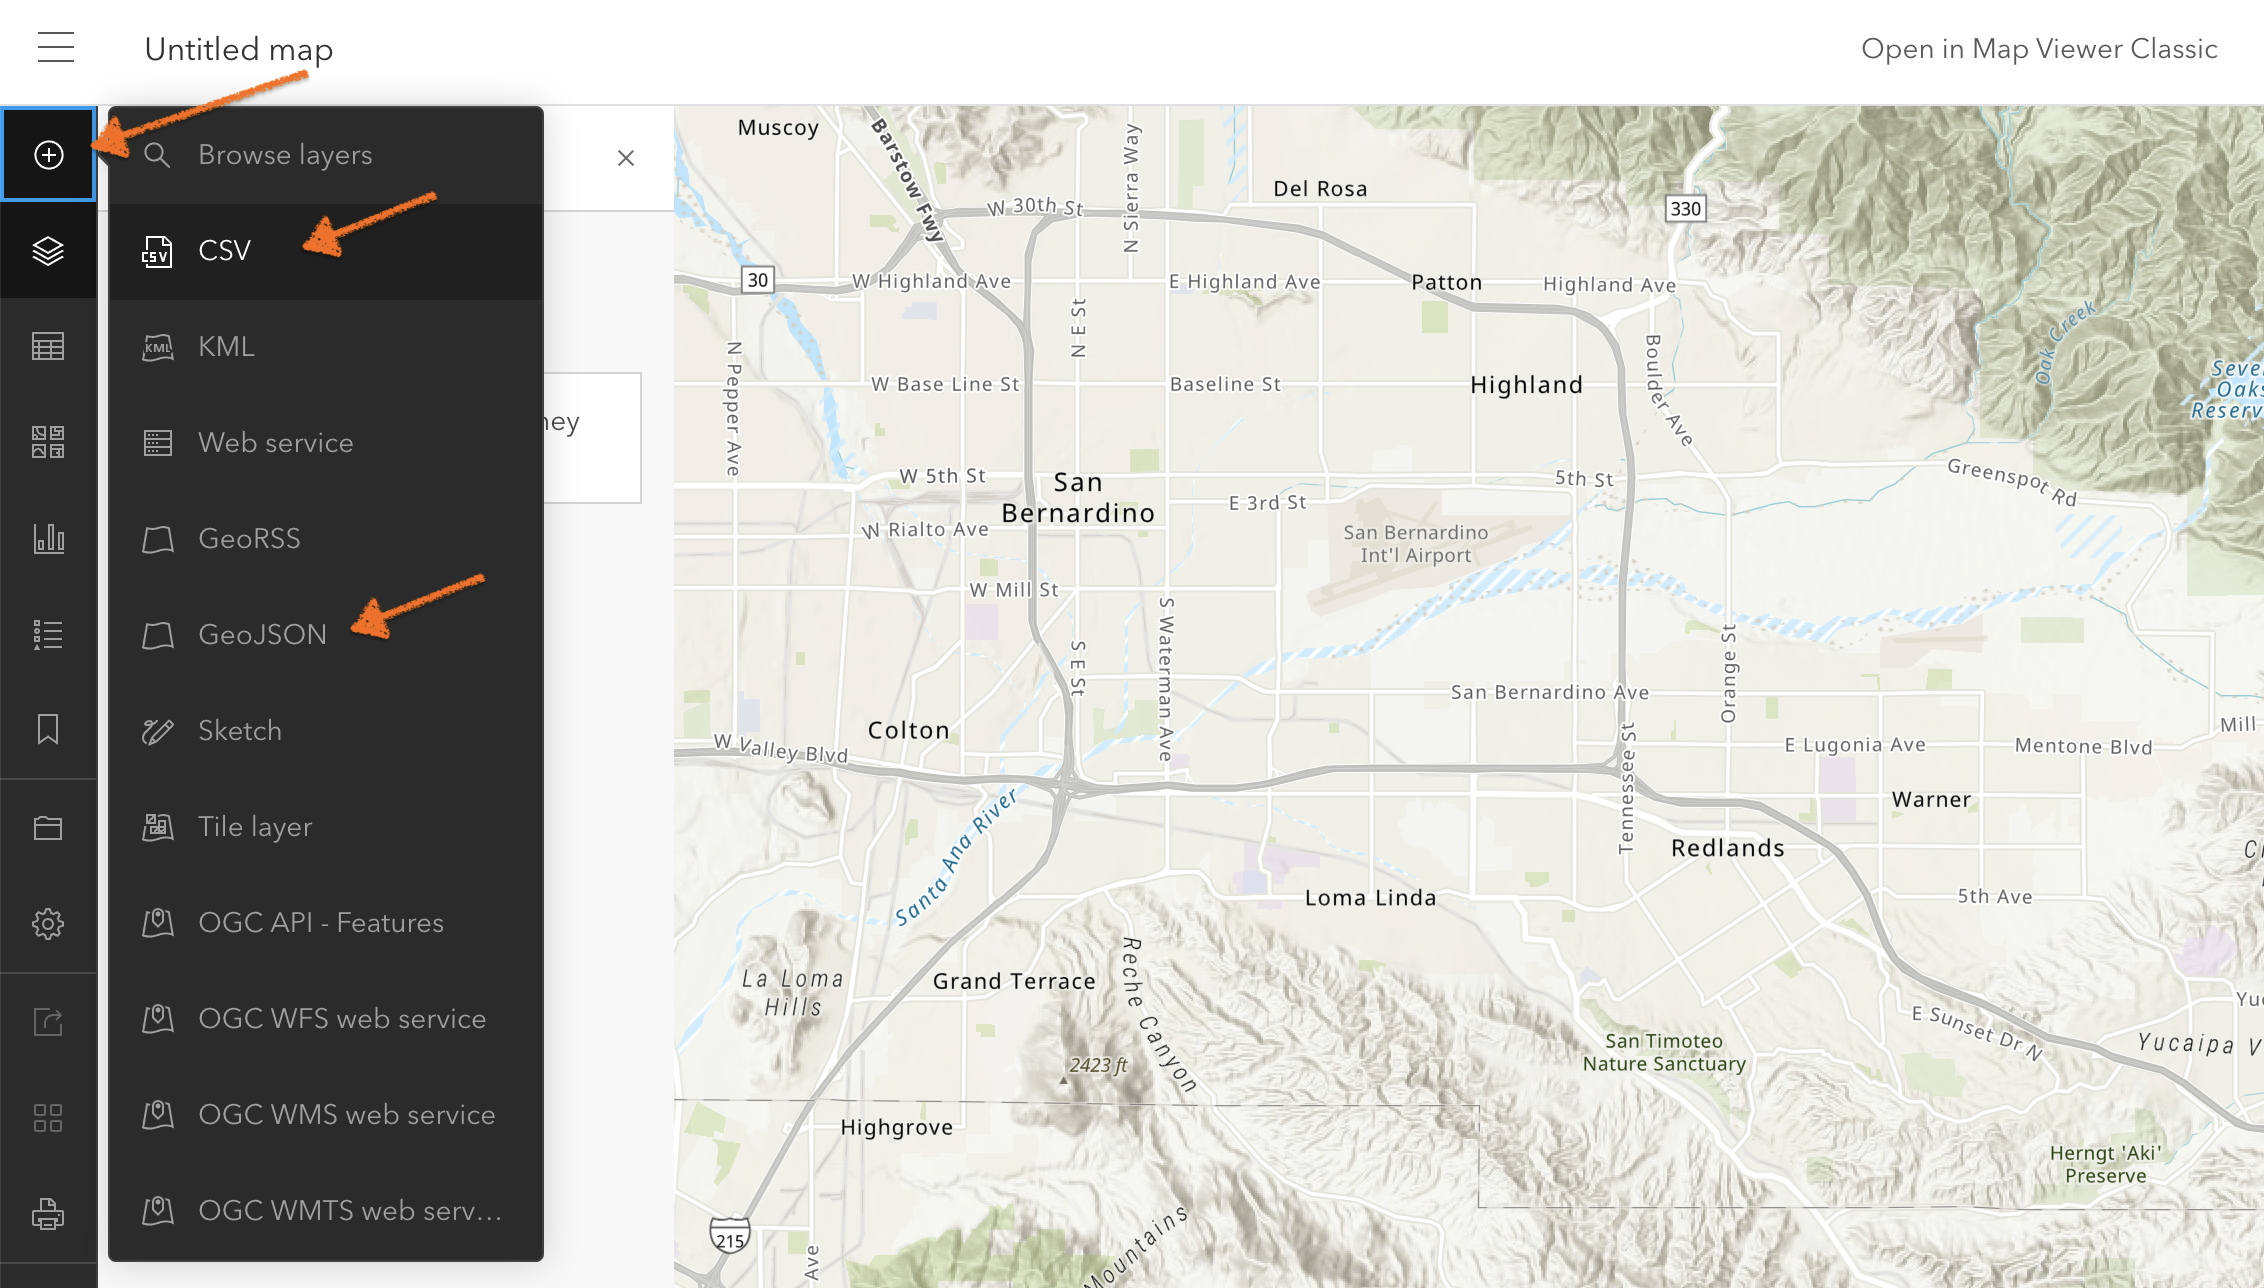 The ArcGIS Online map viewer with the Add menu expanded, showing the various layer types that may be added to the map.